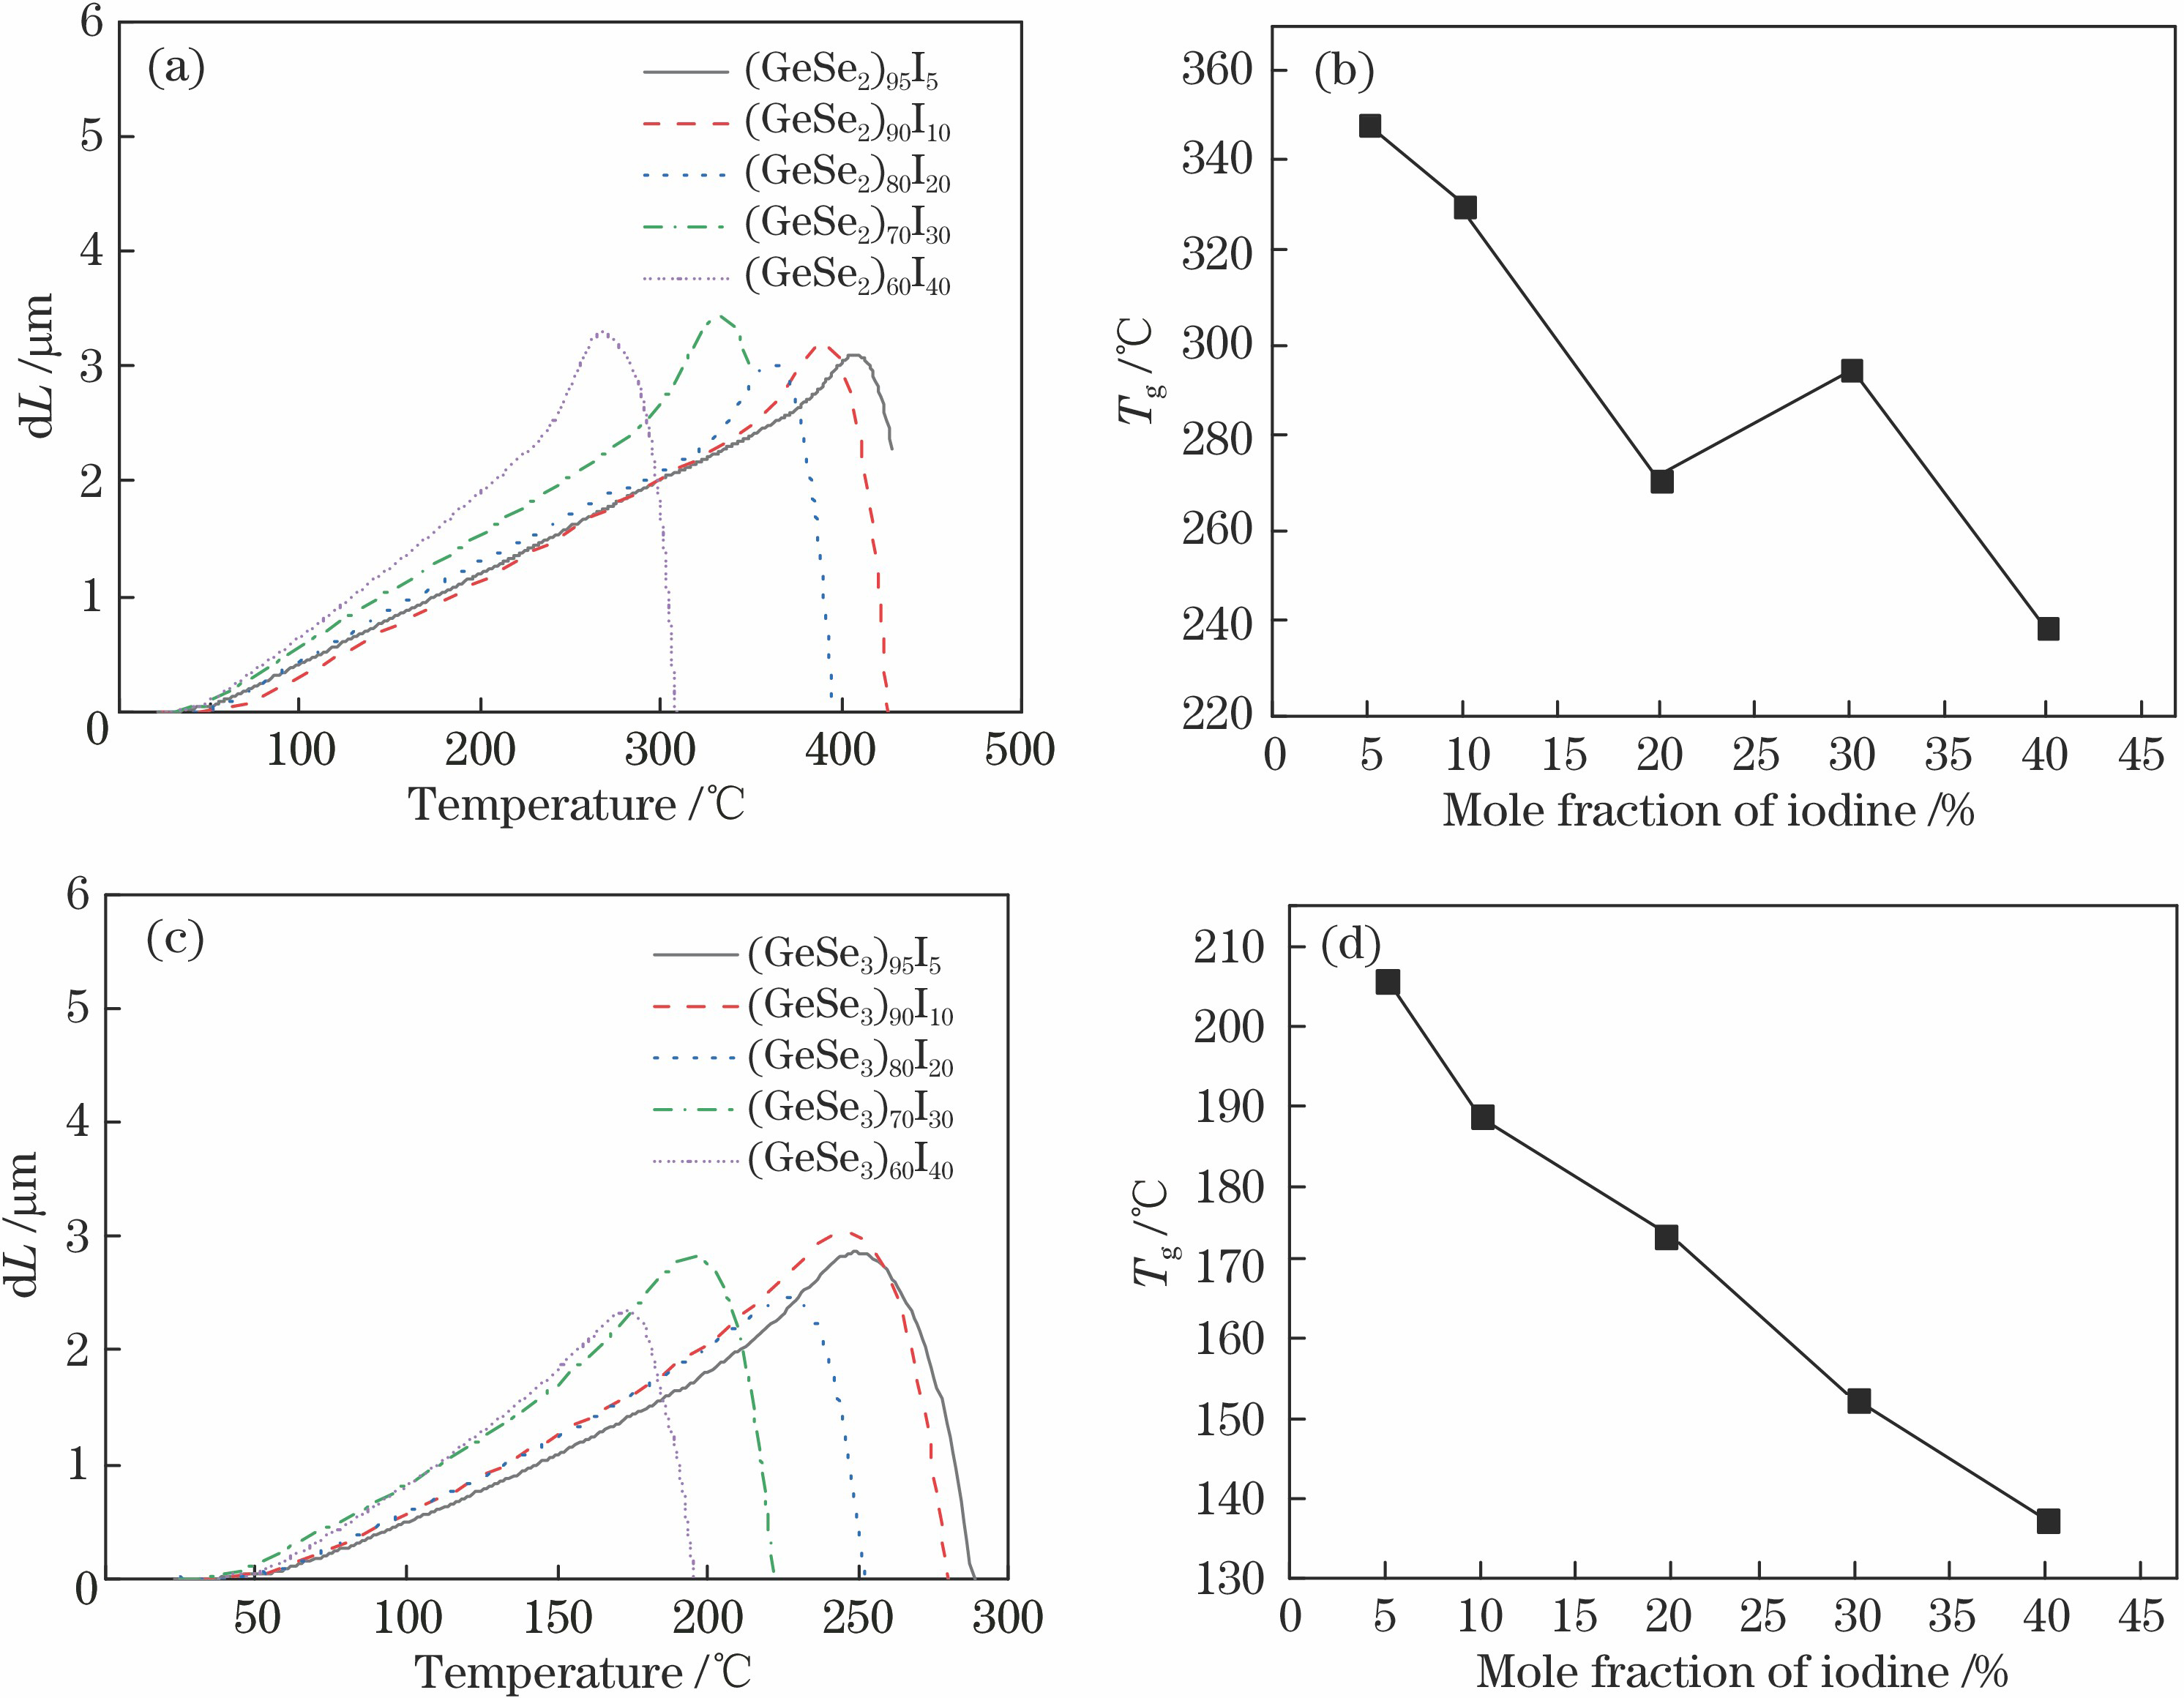 Thermal expansion curves of glass samples and relationship between glass transition temperature and mole fraction of iodine in glass. (a) Thermal expansion curves of (GeSe2)100-xIx; (b) relationship between mole fraction of iodine in (GeSe2)100-xIx and glass transition temperature; (c) thermal expansion curves of (GeSe3)100-xIx; (d) relationship between mole fraction of iodine in (GeSe3)100-xIx and glass transition temperature